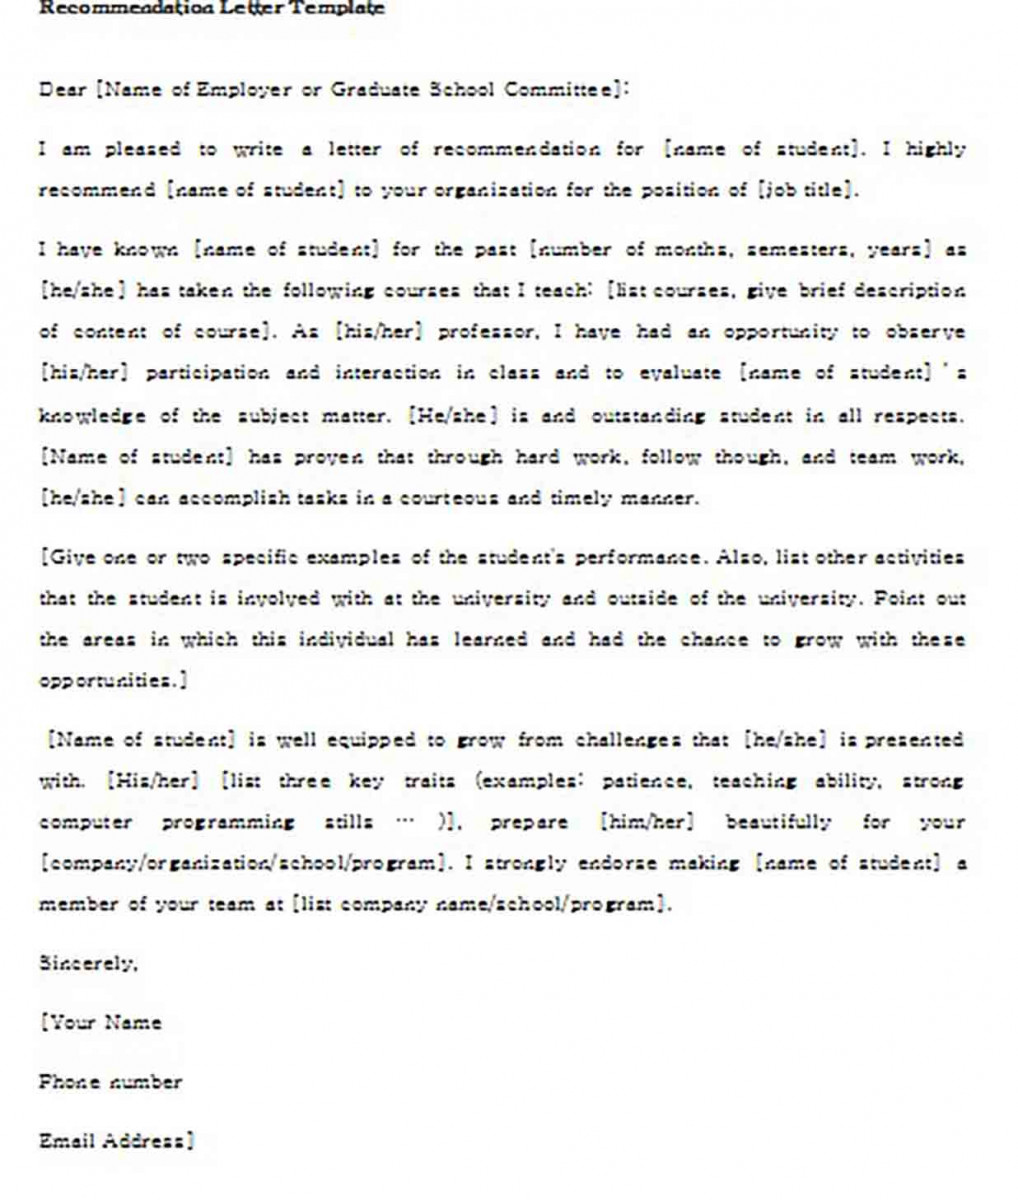 Letter of Recommendation for Student from Teacher Example